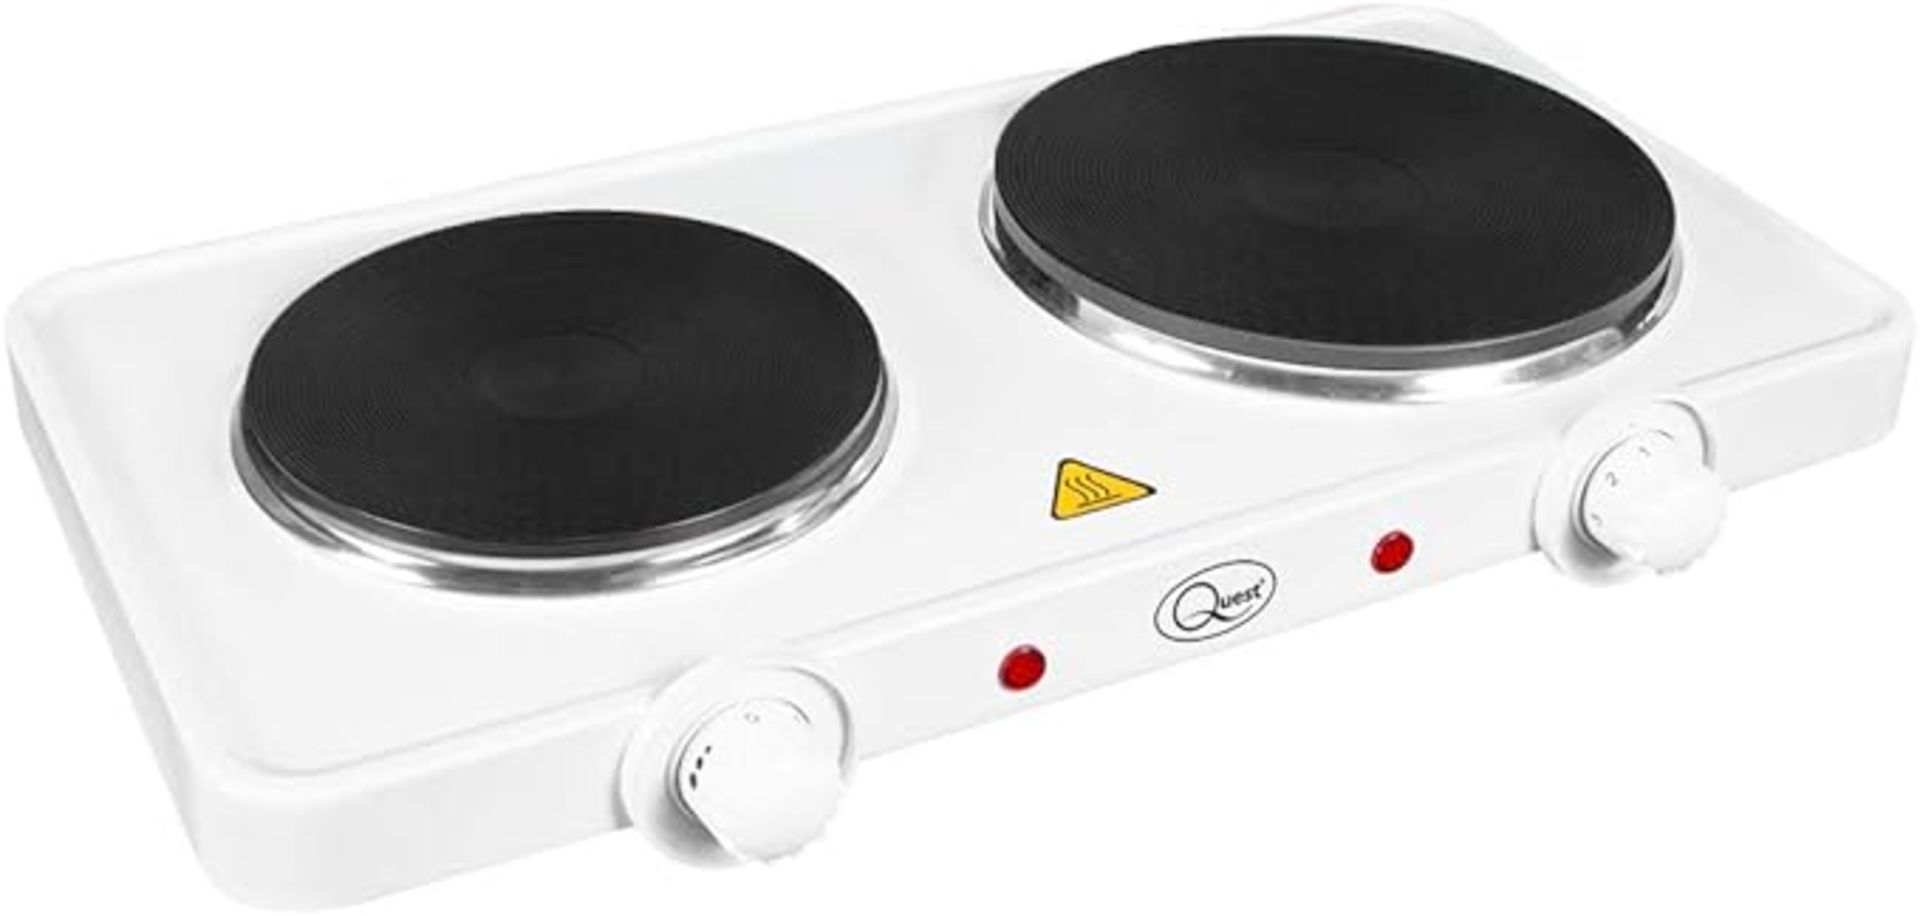 Quest 35250 Electric Twin Hot Plate Control 1000W & 1500W Hobs / 5 Temperature Settings/Portable,